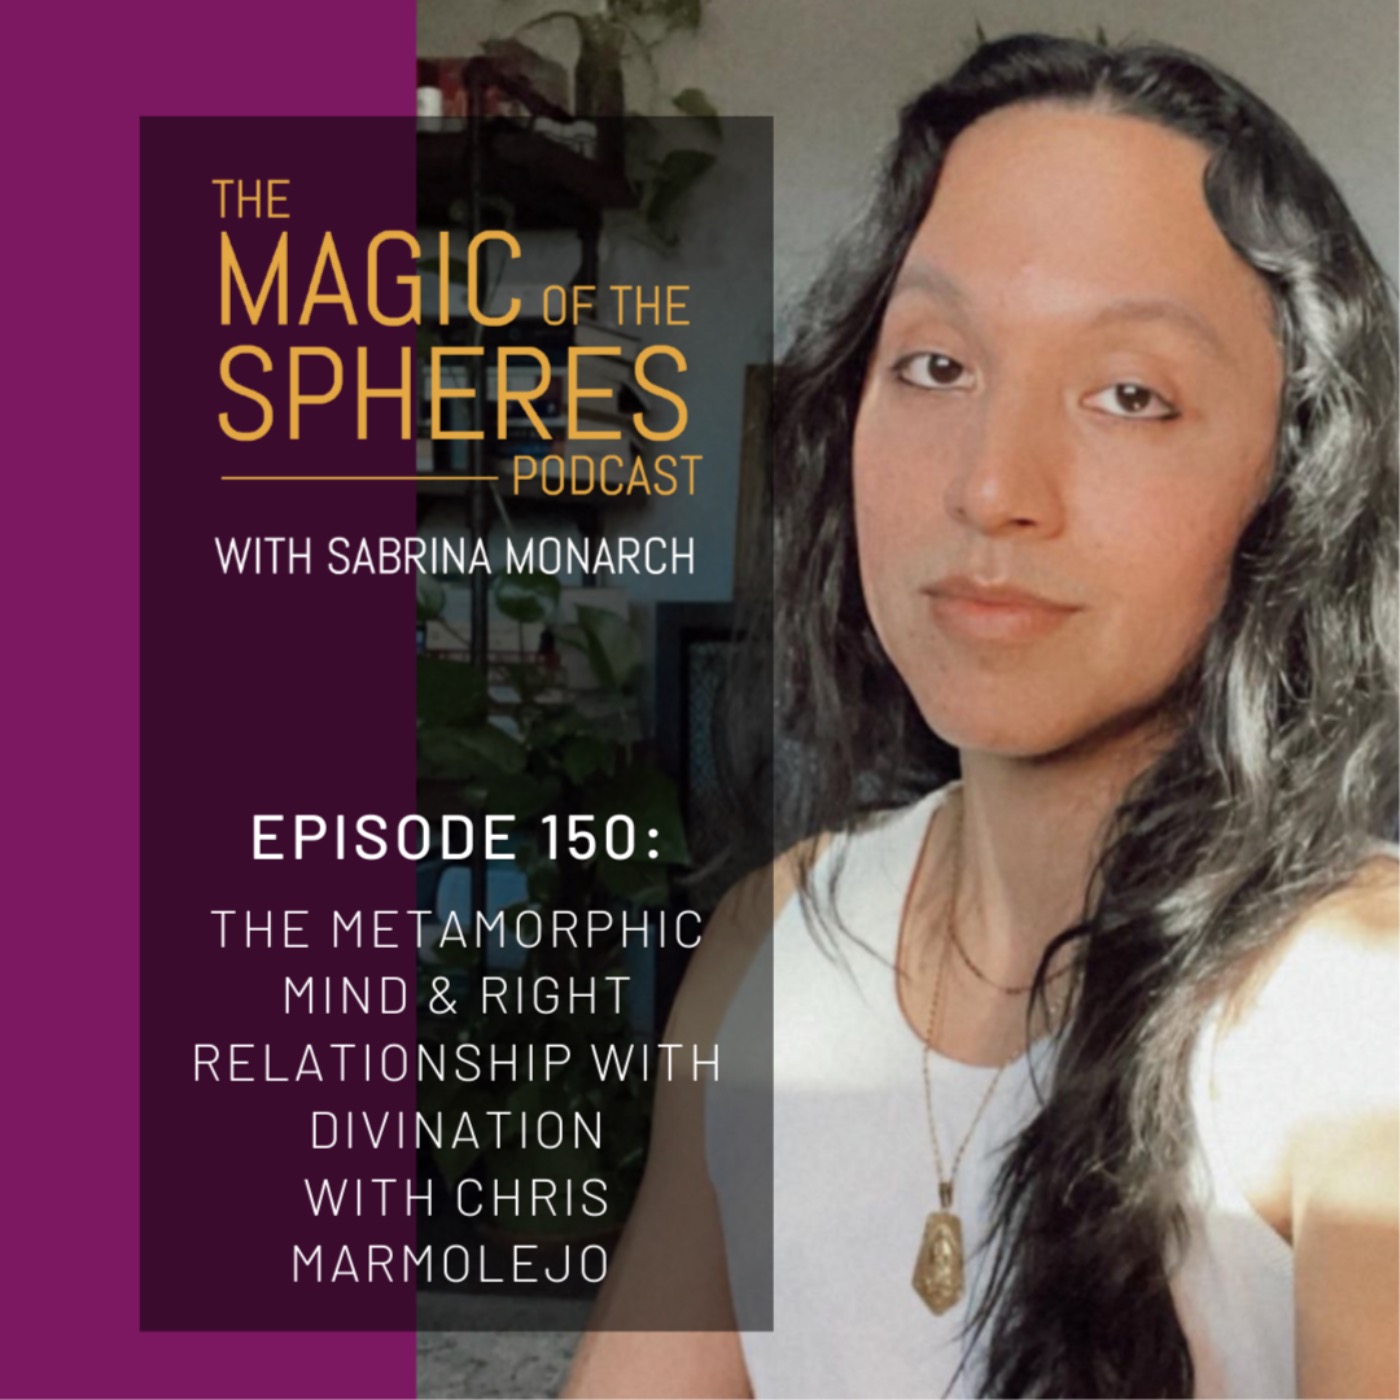 The Metamorphic Mind & Right Relationship with Divination with Chris Marmolejo